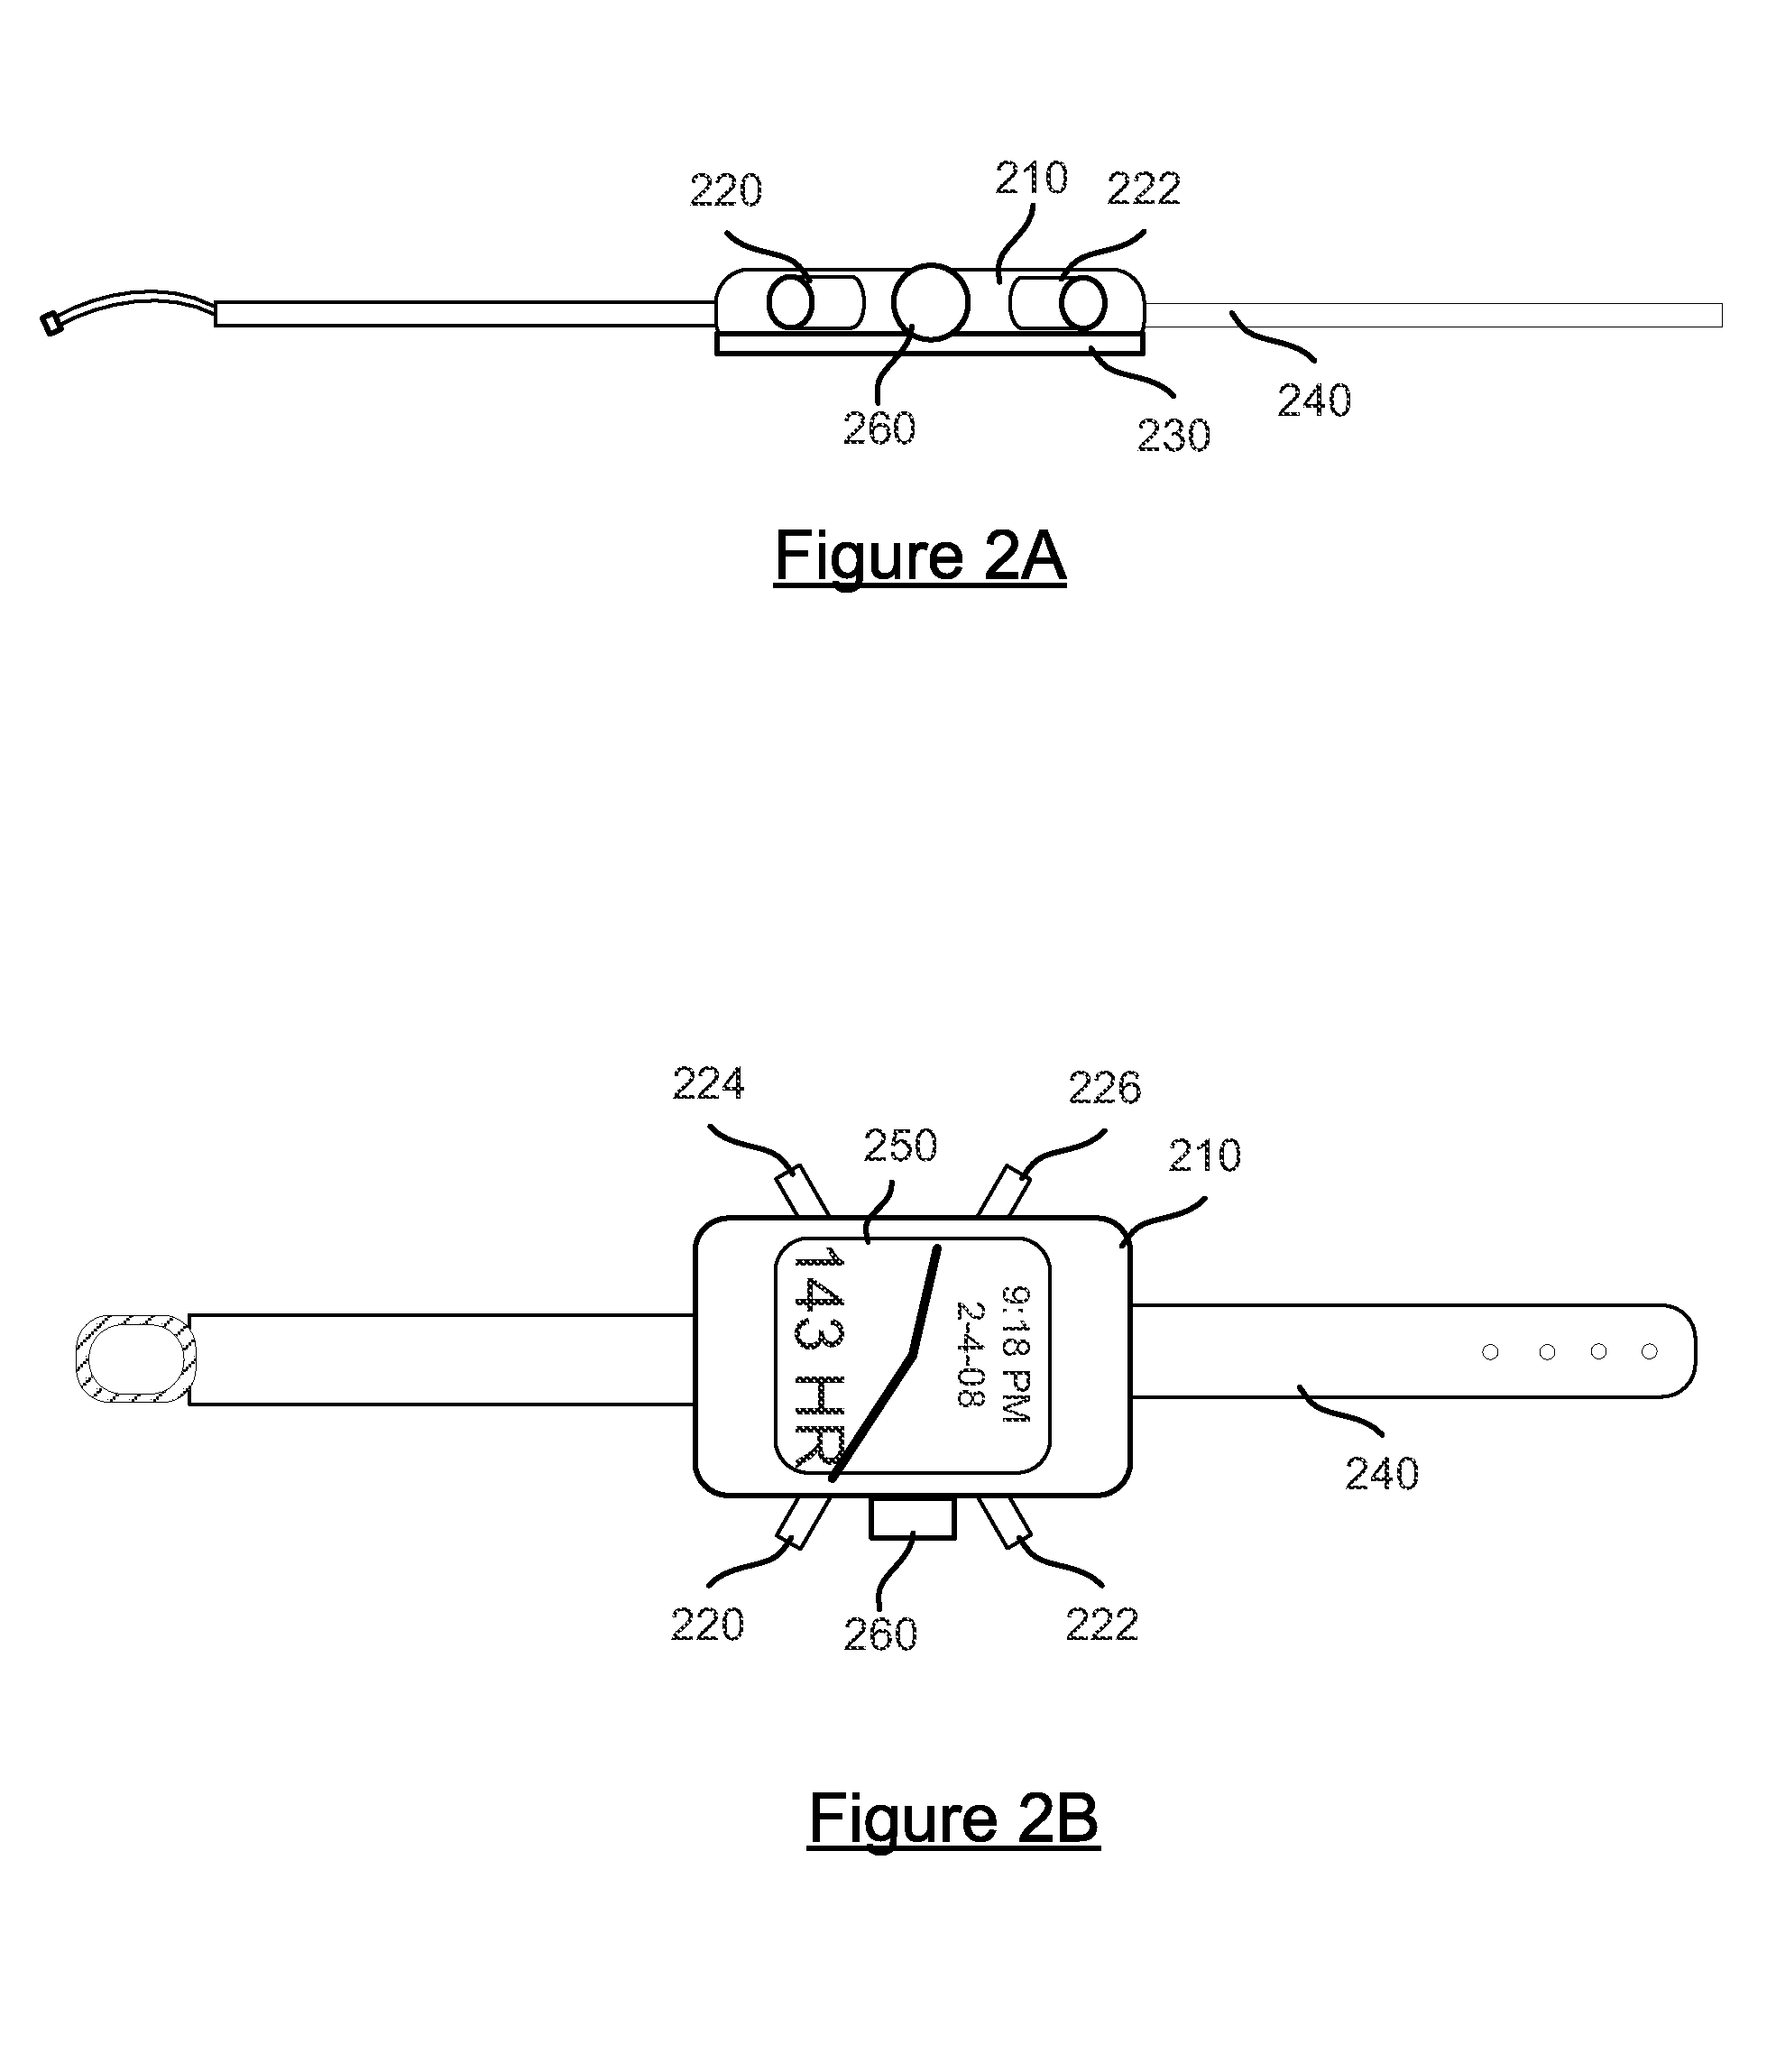 Electrostatic discharge protection for analog component of wrist-worn device